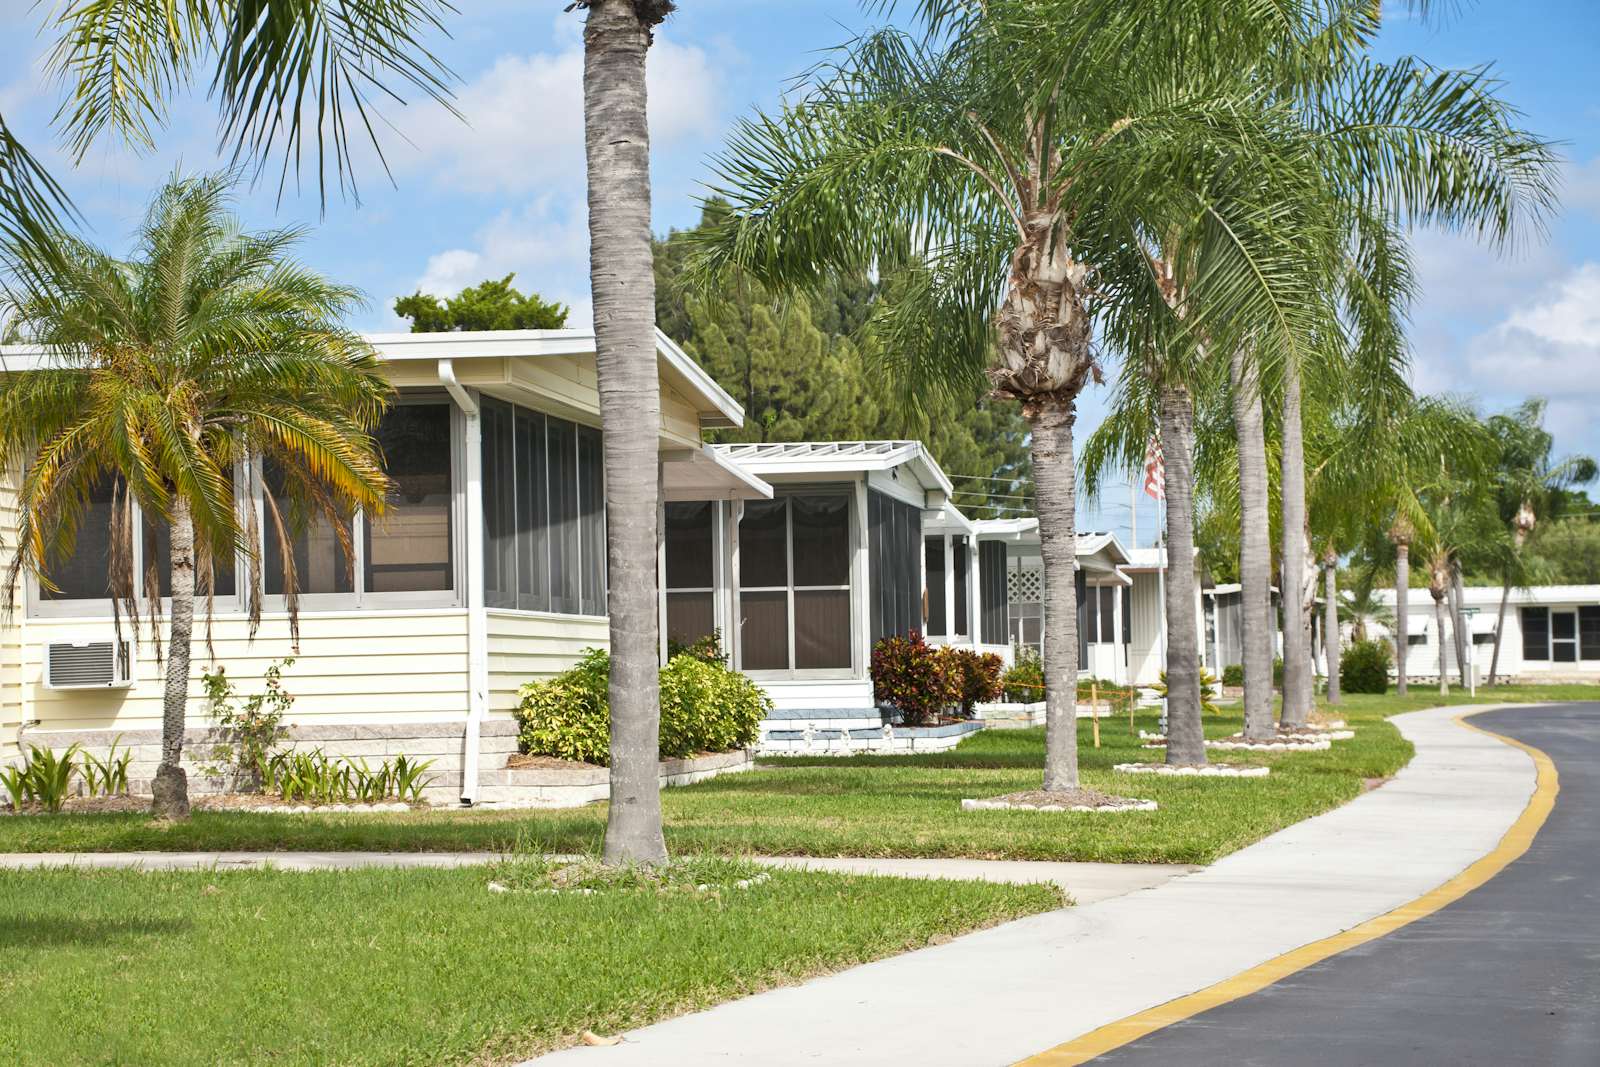 Mobile homes in a row located in a mobile home park in Florida. Street view with palm trees and sidewalk.